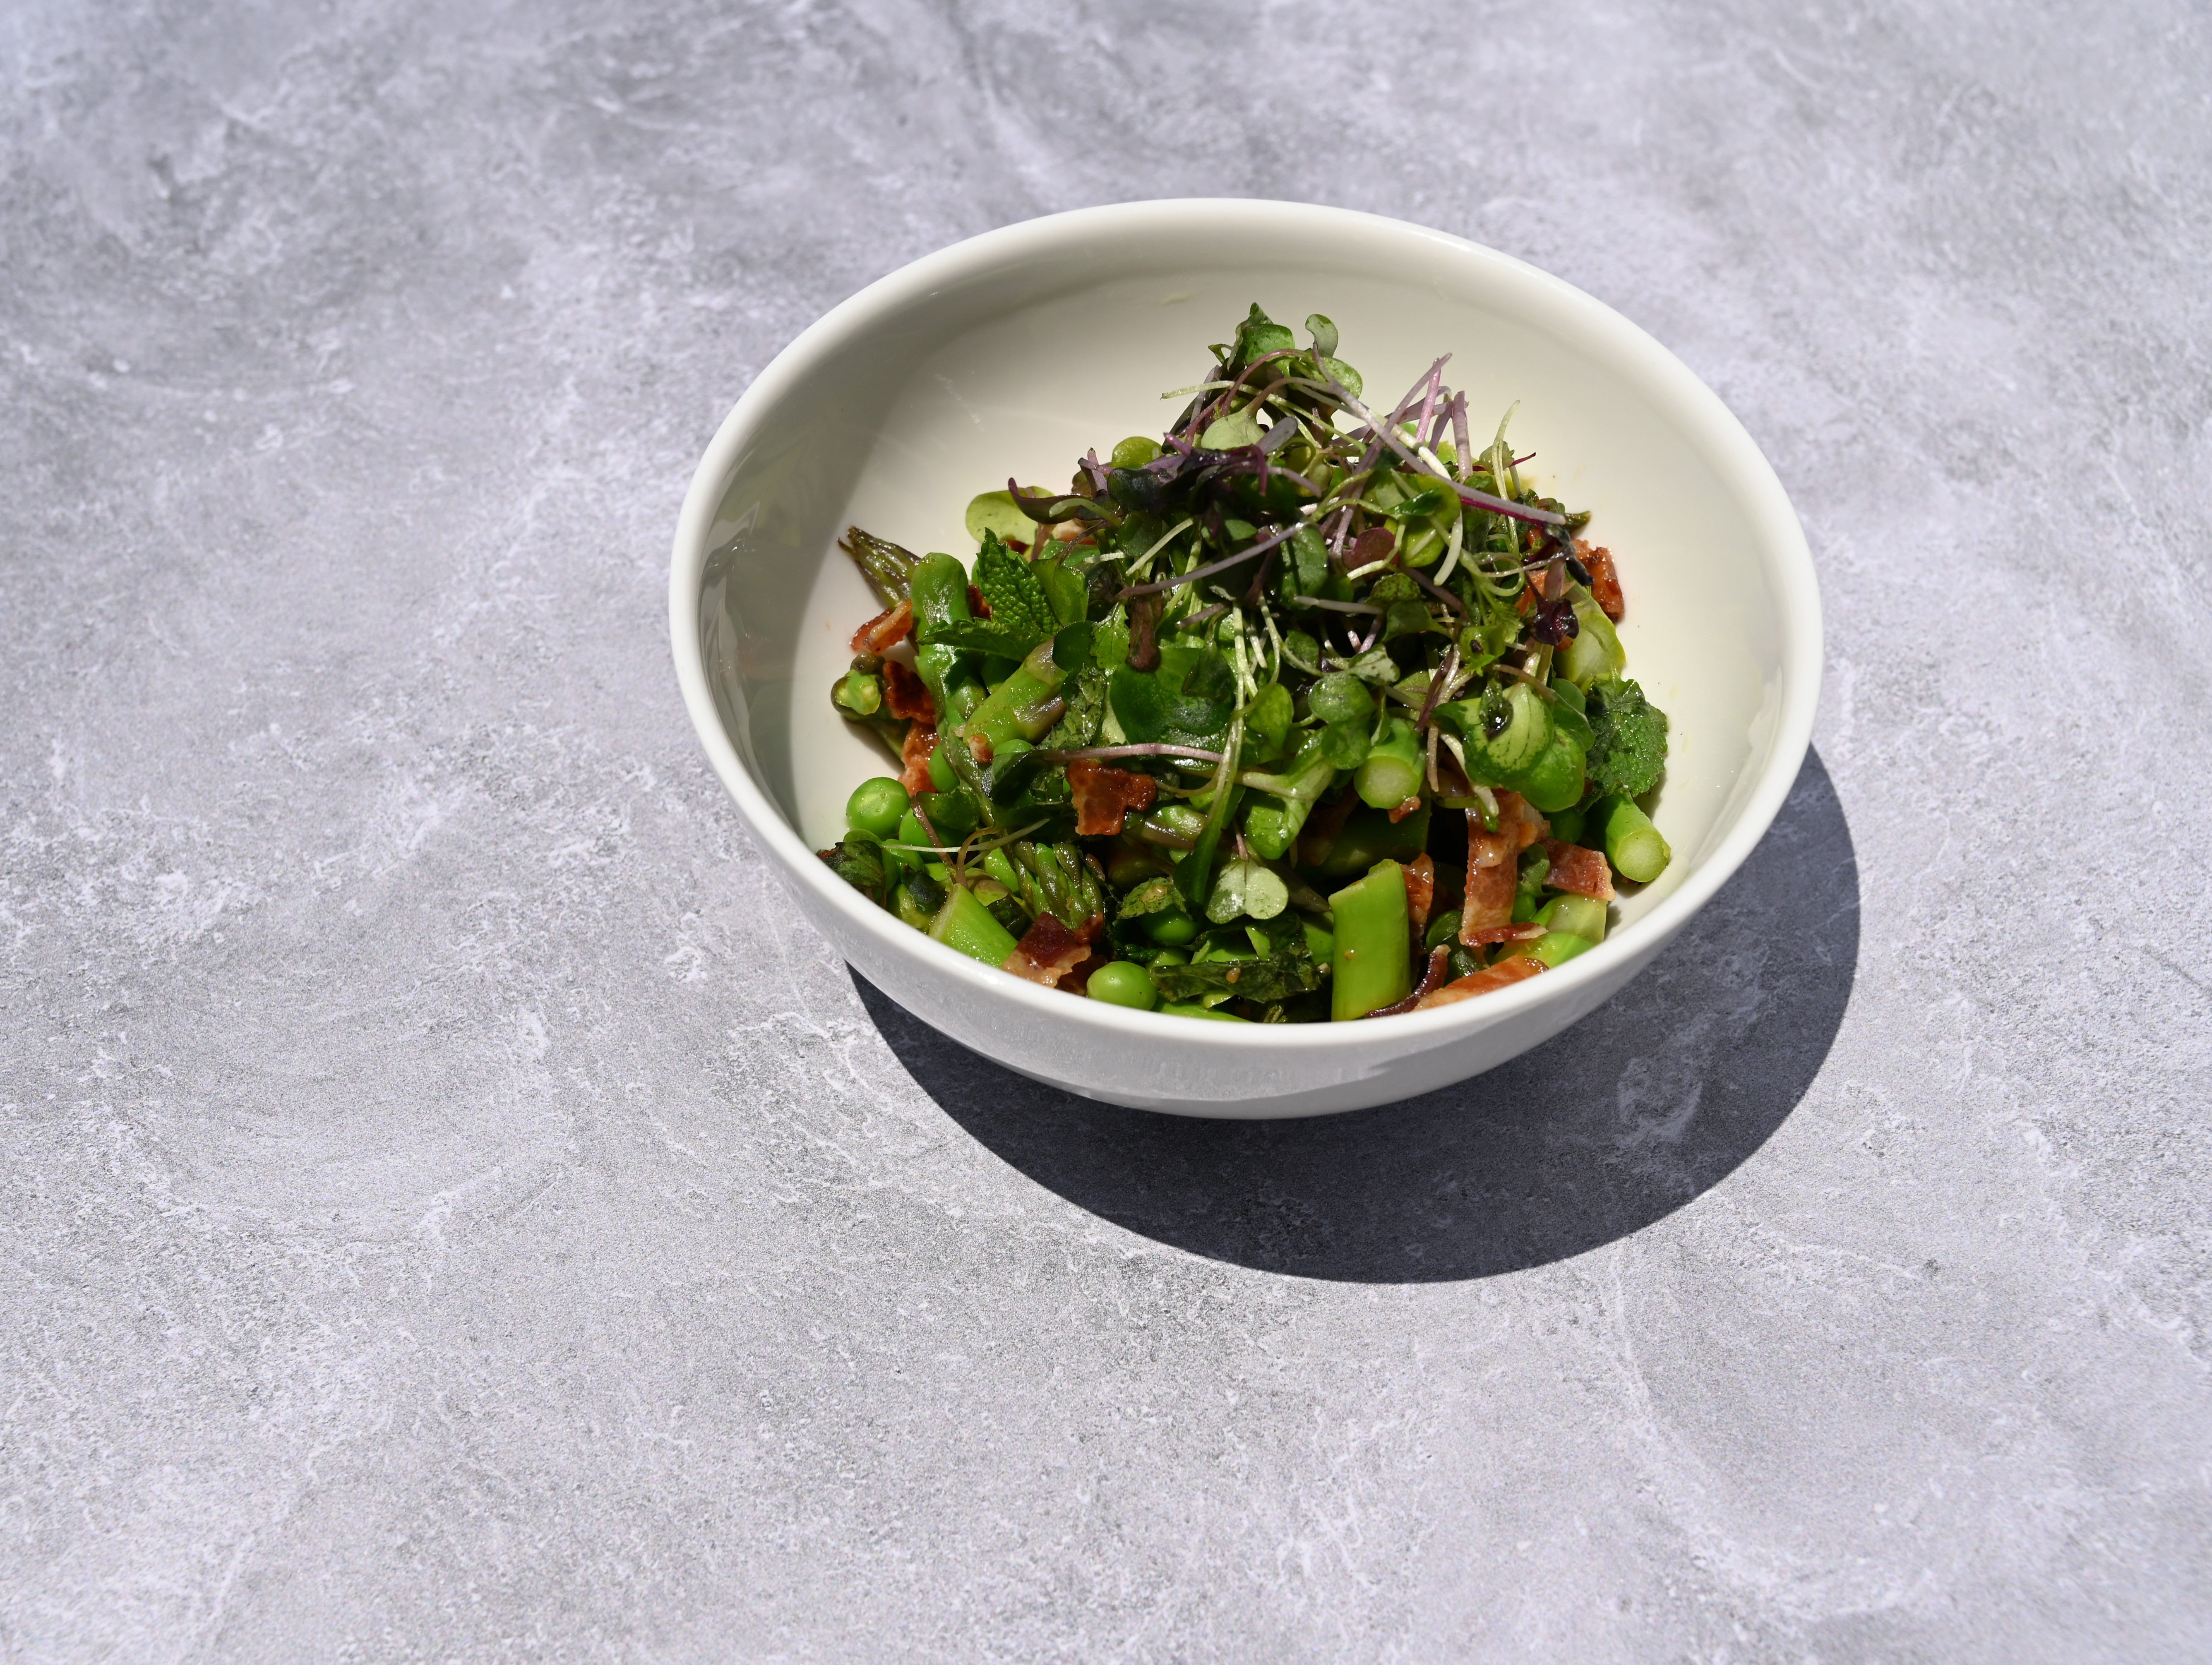 A colorful salad on a stone background in a bowl